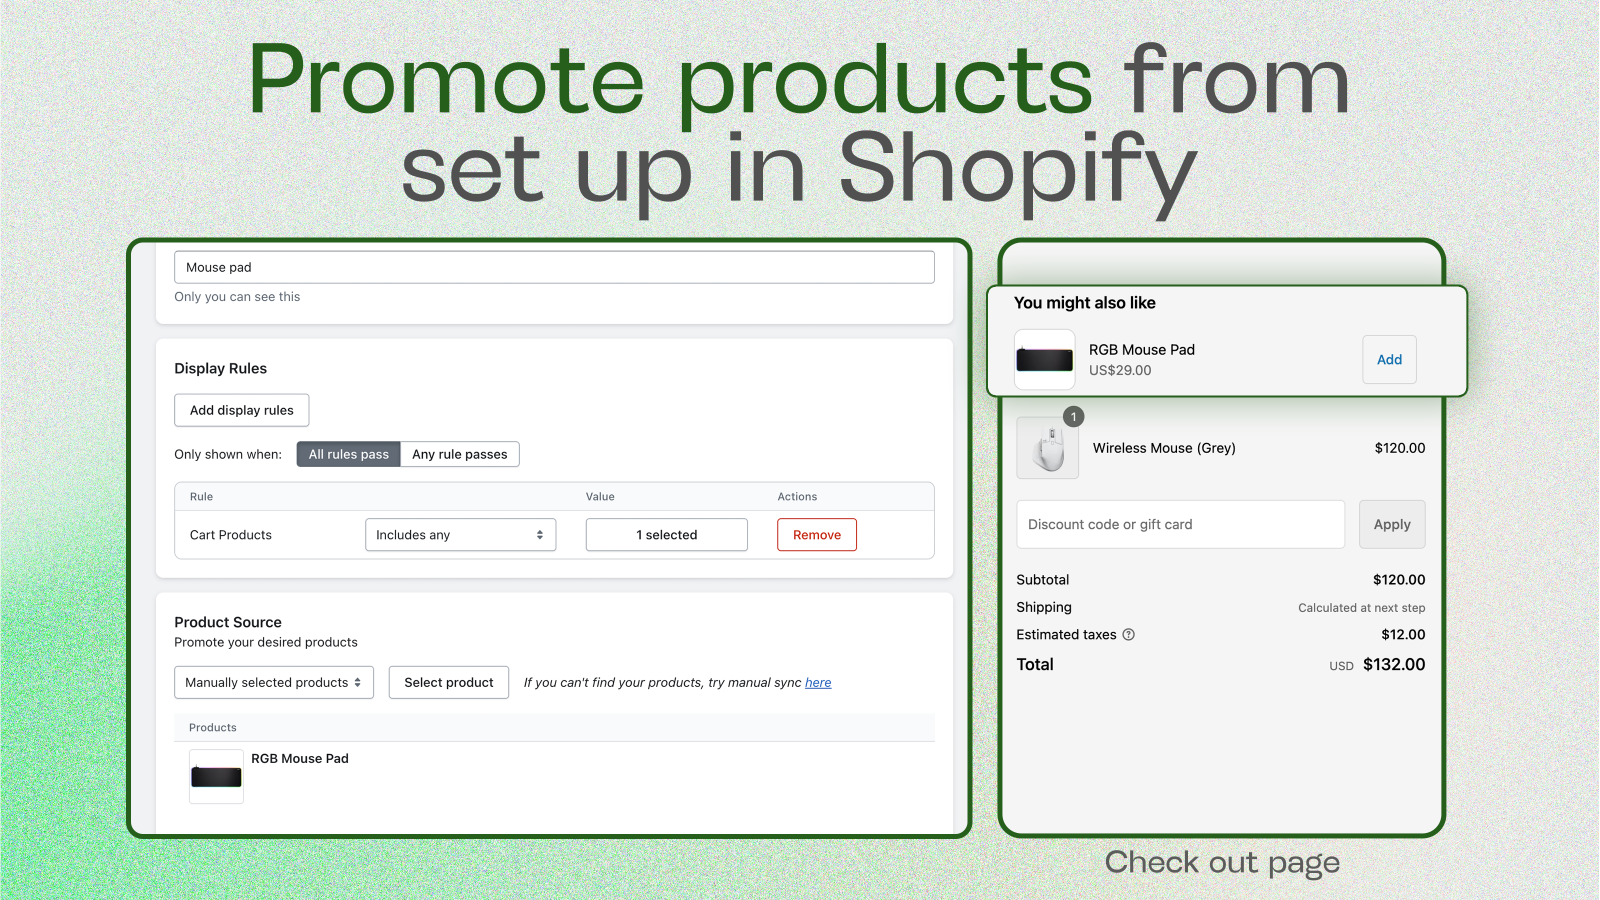 Promote products from set up in Shopify